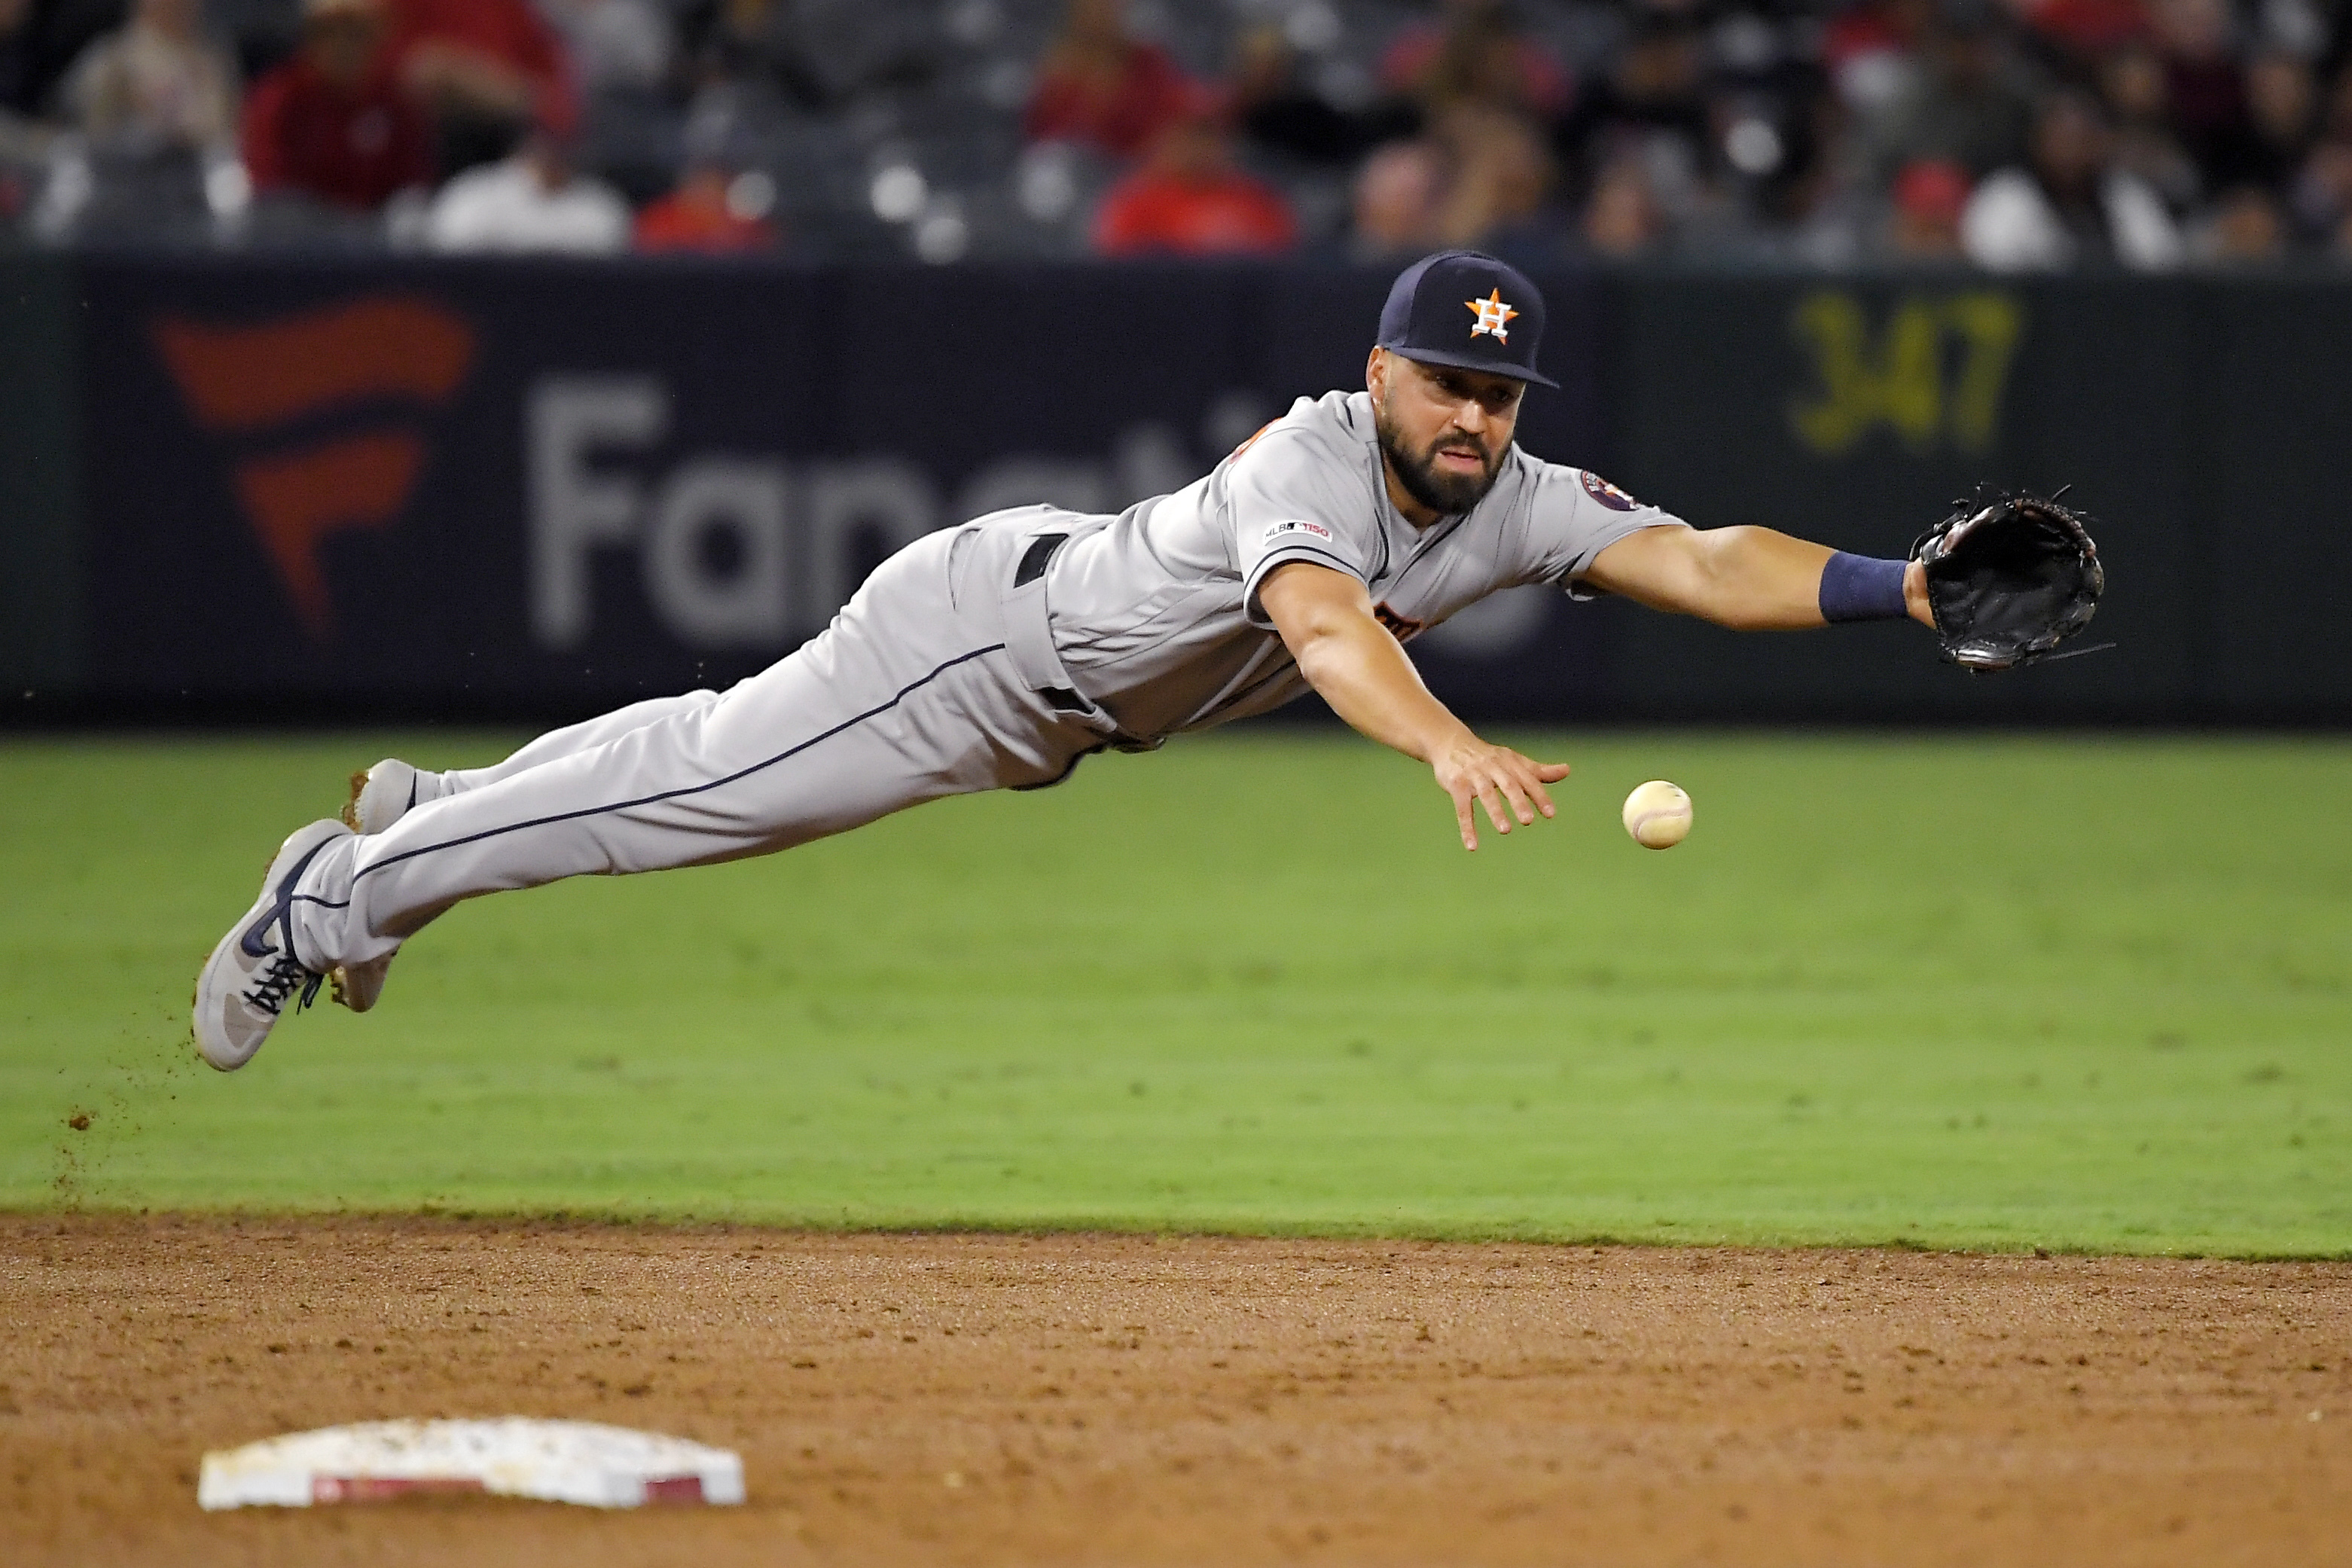 Angels outlast Astros 4-3 in 12, preventing Houston clinch